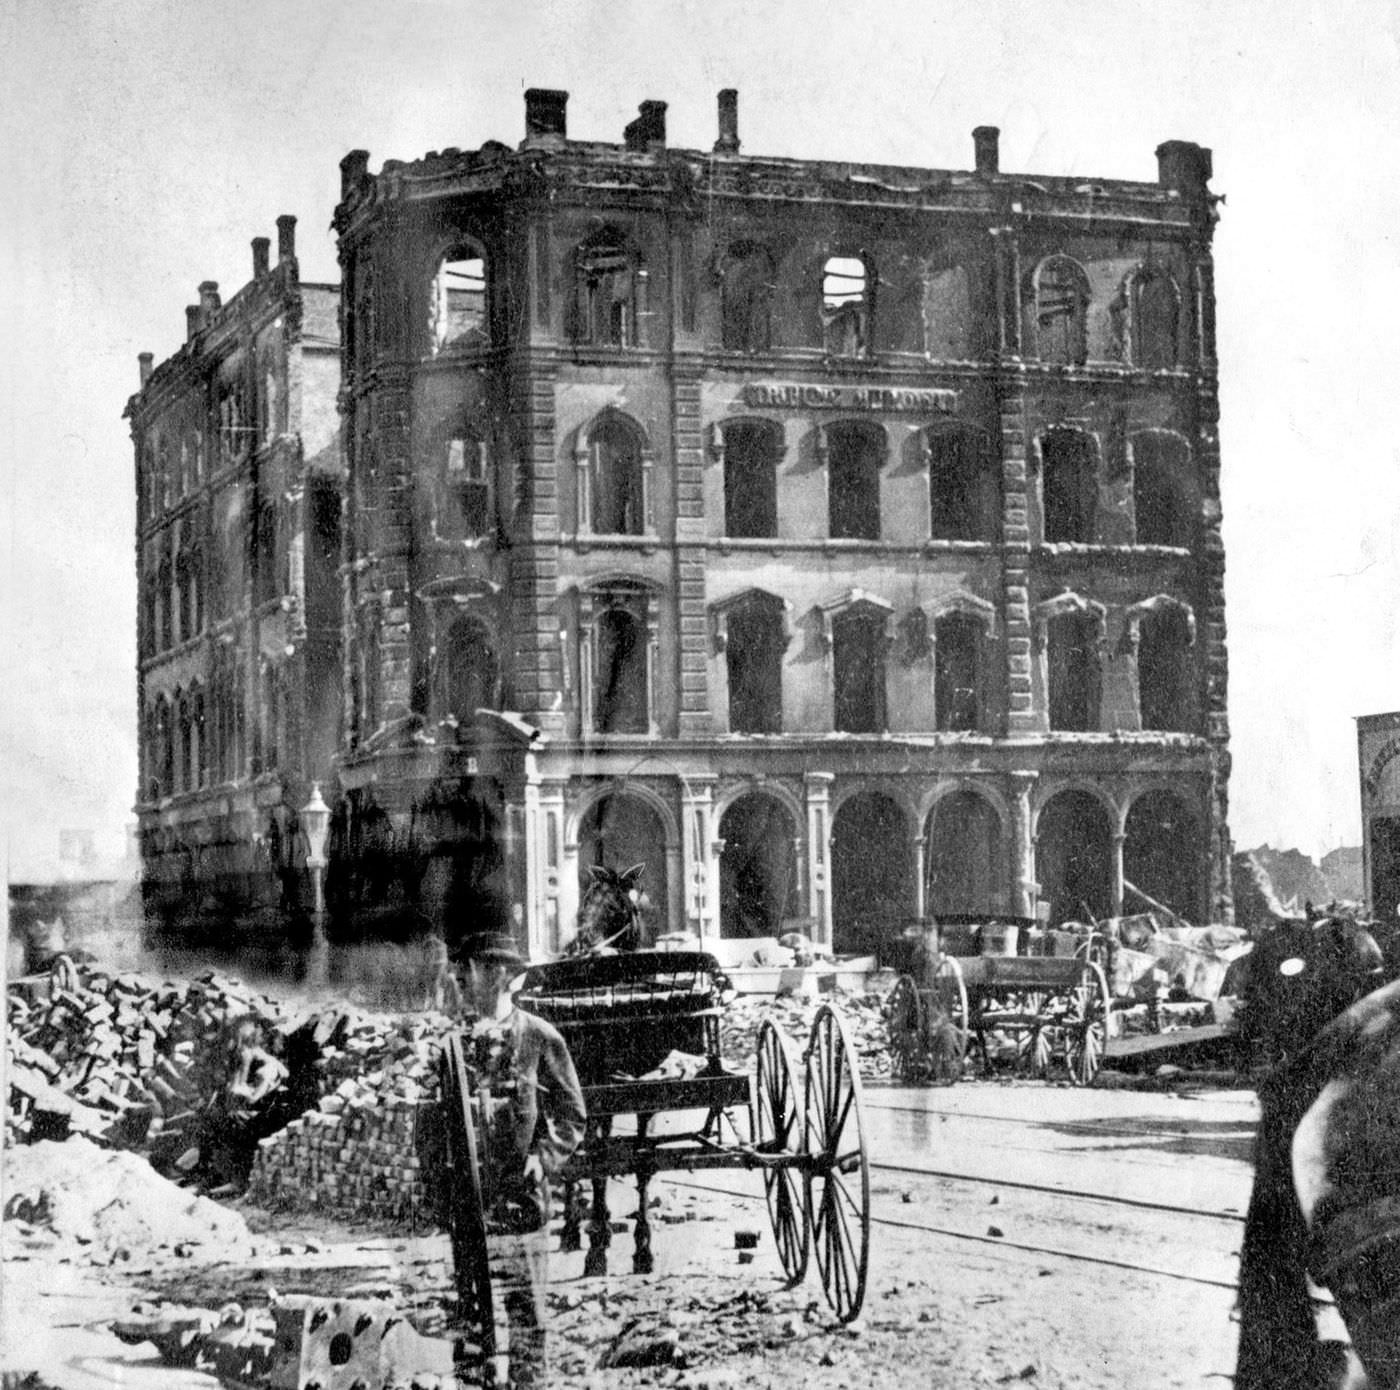 The Chicago Tribune building stands at the southeast corner of Dearborn and Madison streets after the Great Chicago Fire of 1871.